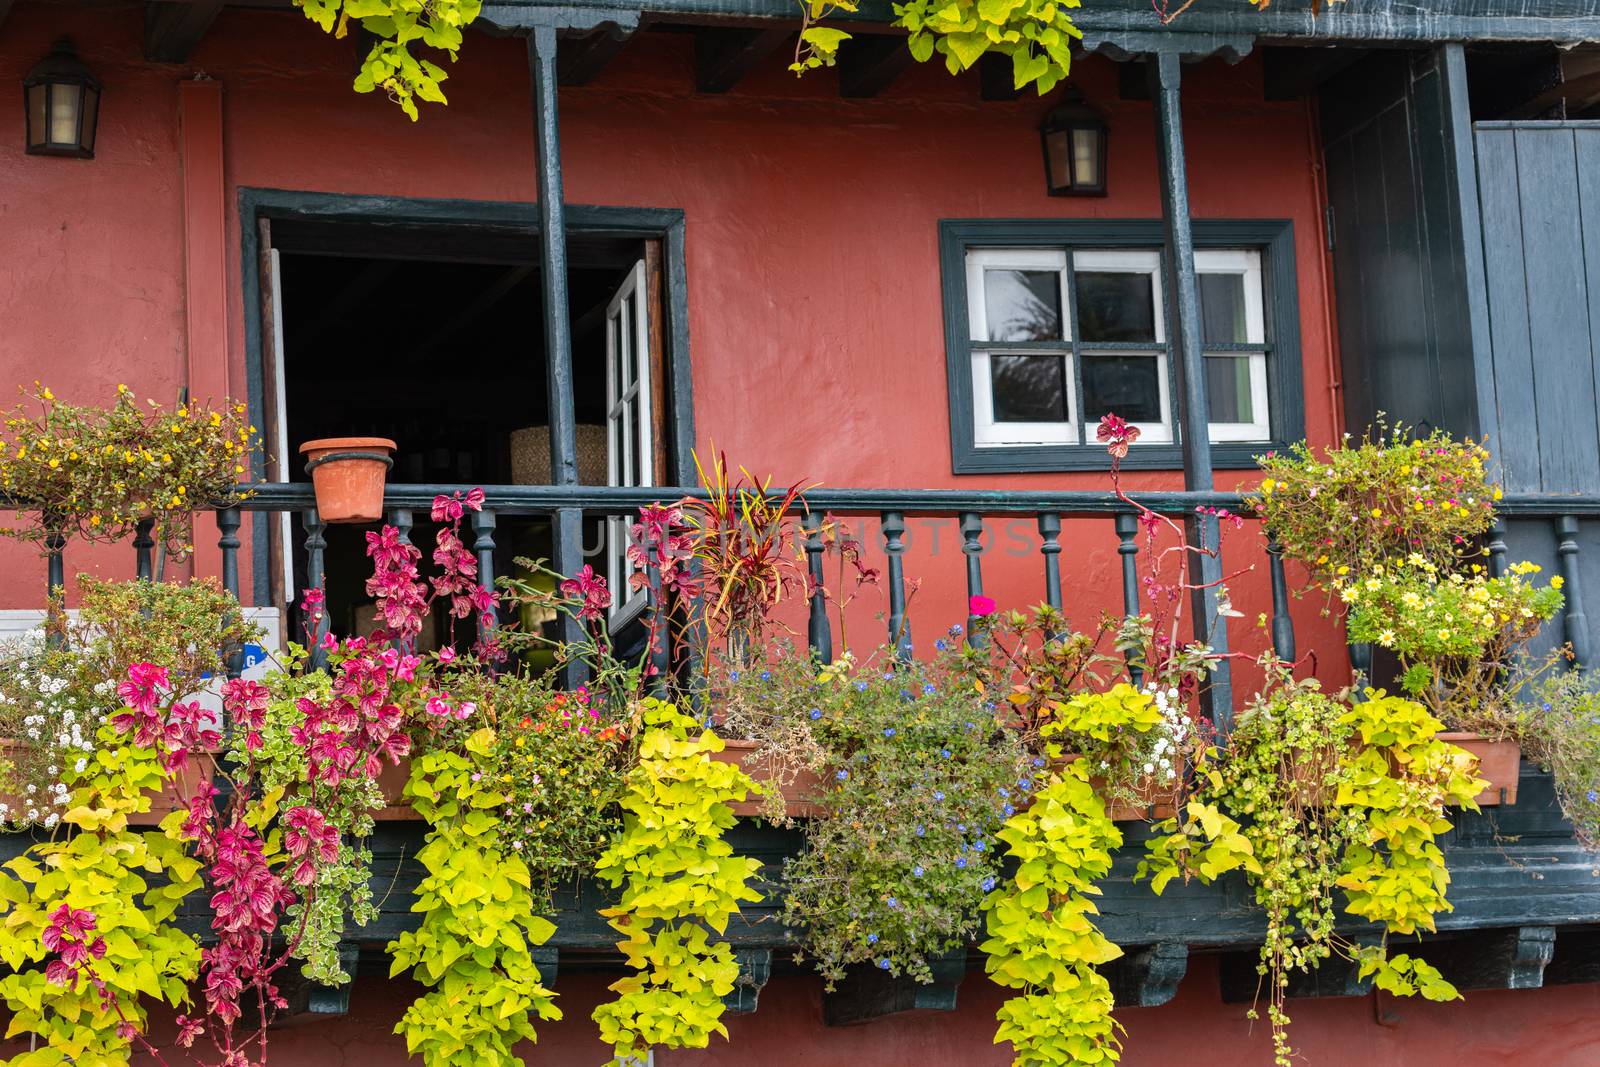 Famous ancient colorful balconies decorated with flowers. Santa Cruz - capital city of the island of La Palma, Canary Islands, Spain.